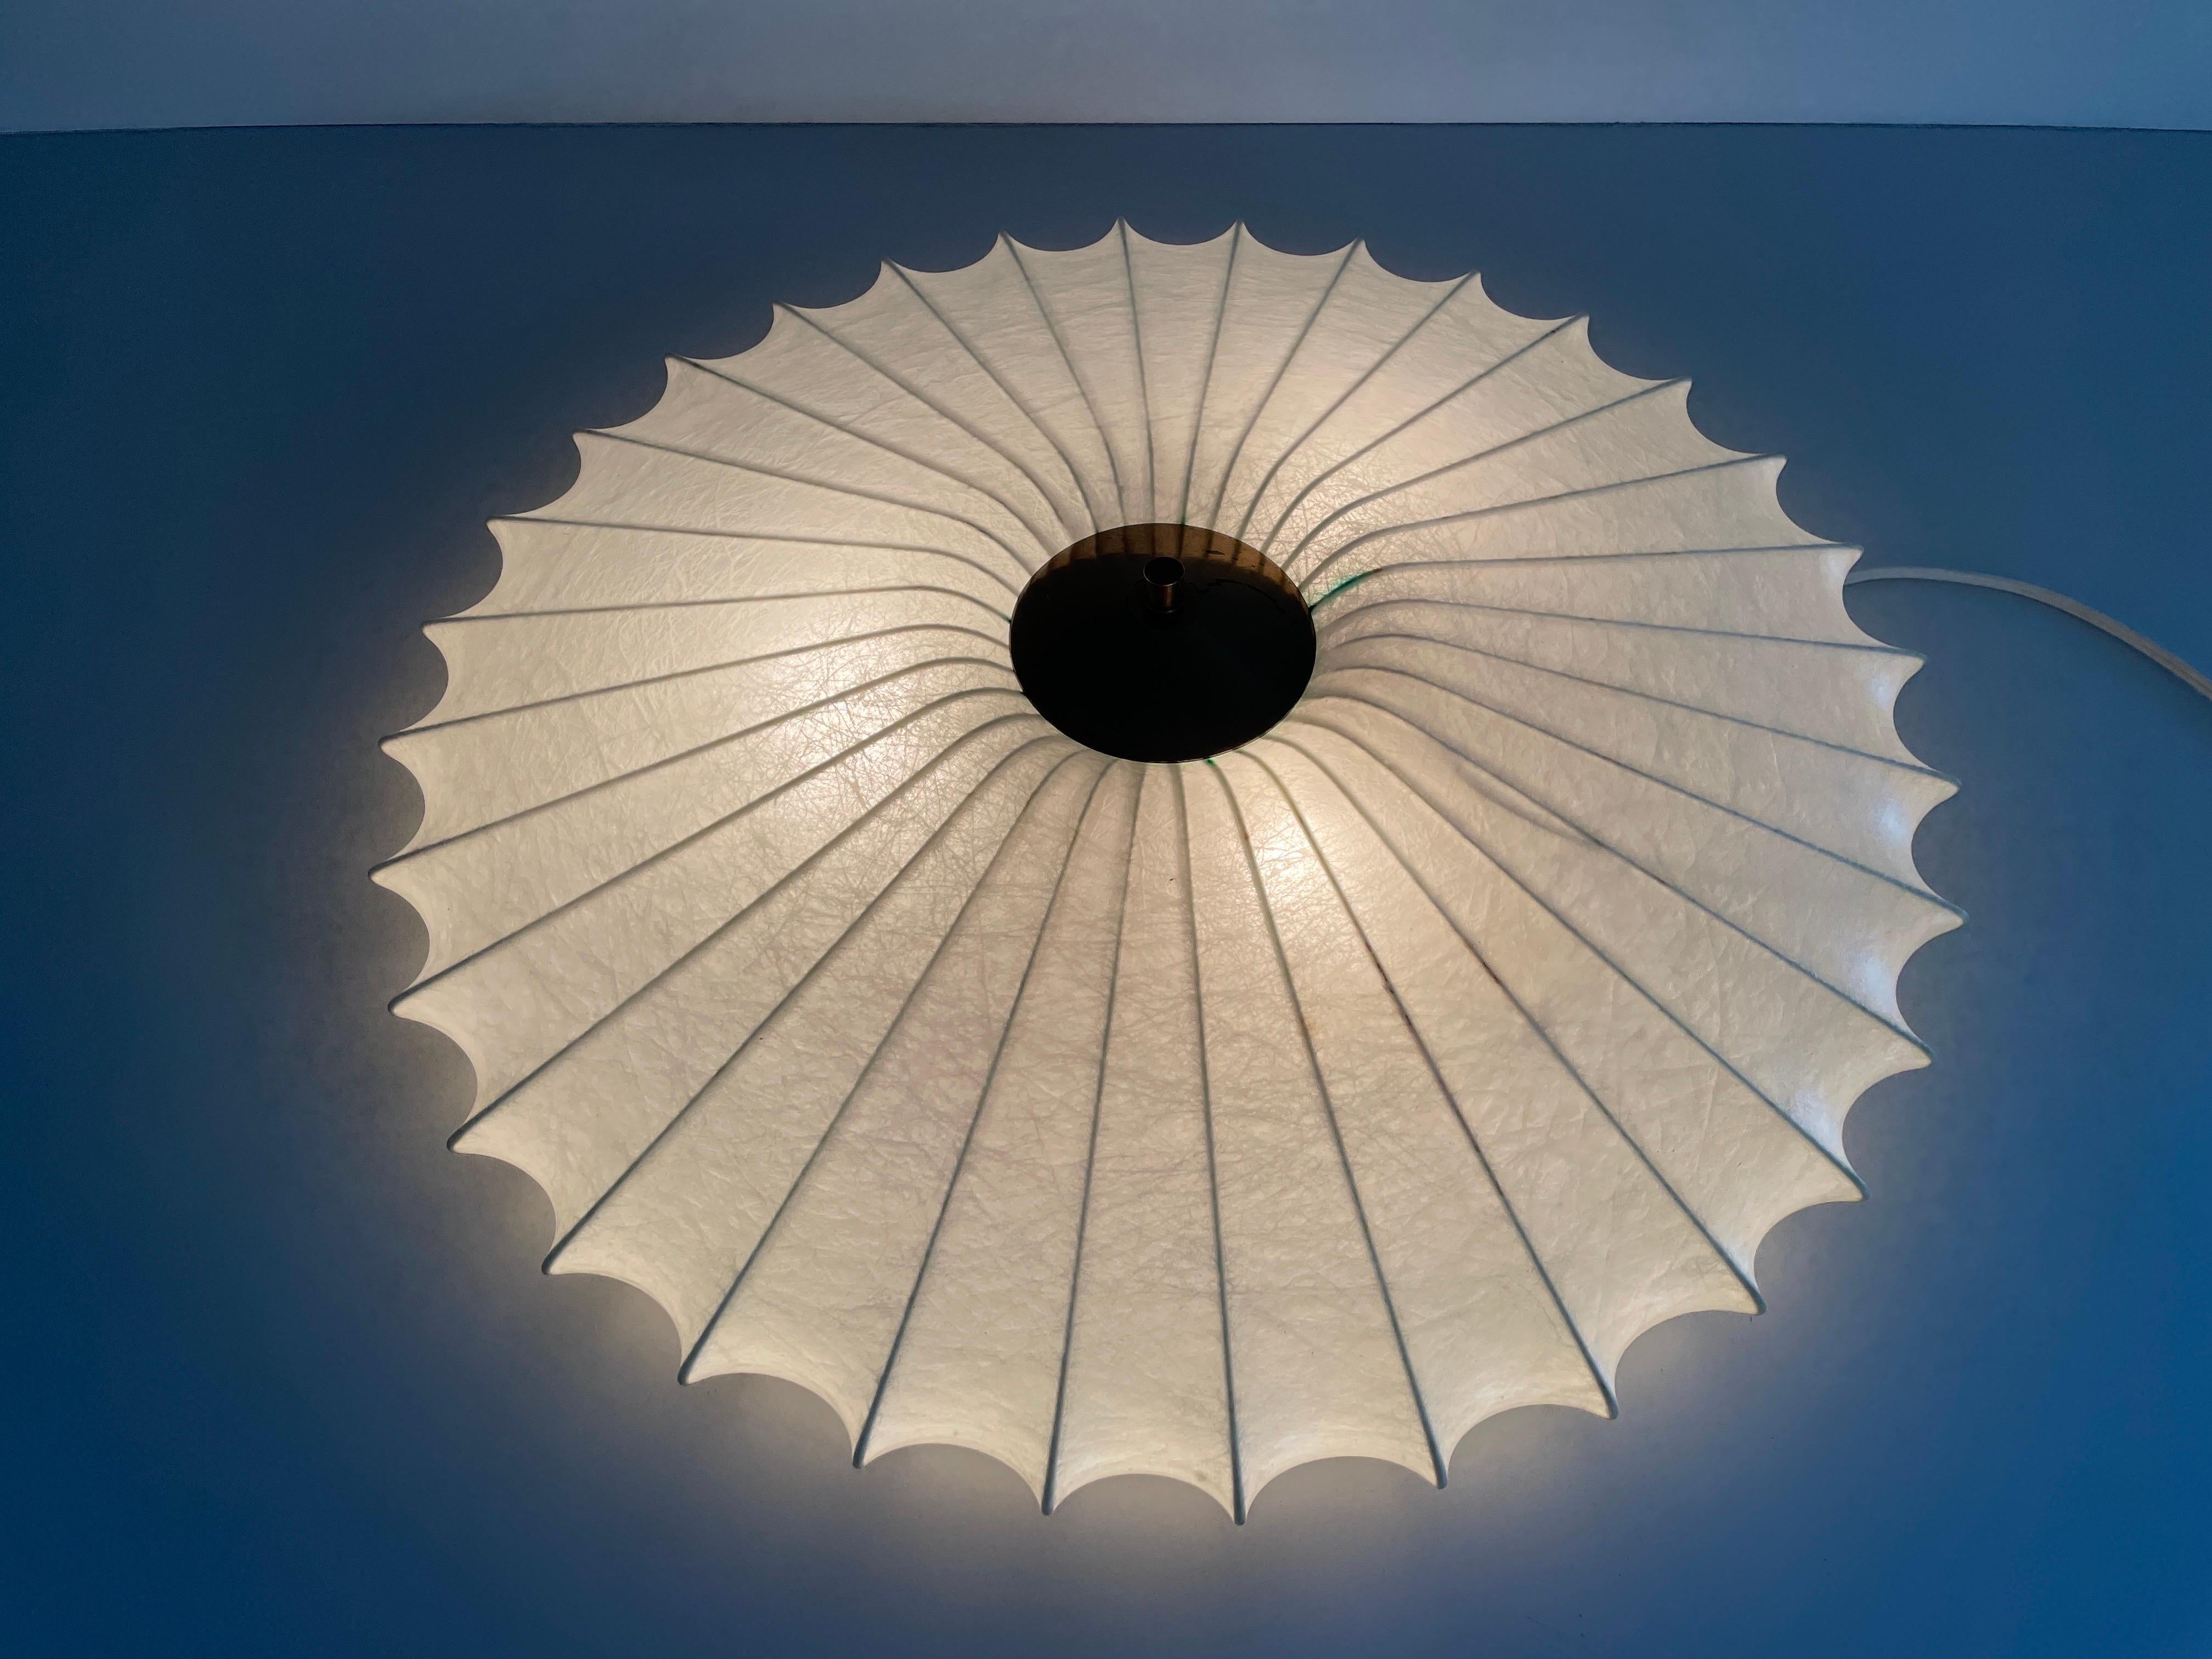 Cocoon Large Flush Mount Ceiling Lamp by Goldkant, 1960s, Germany For Sale 8